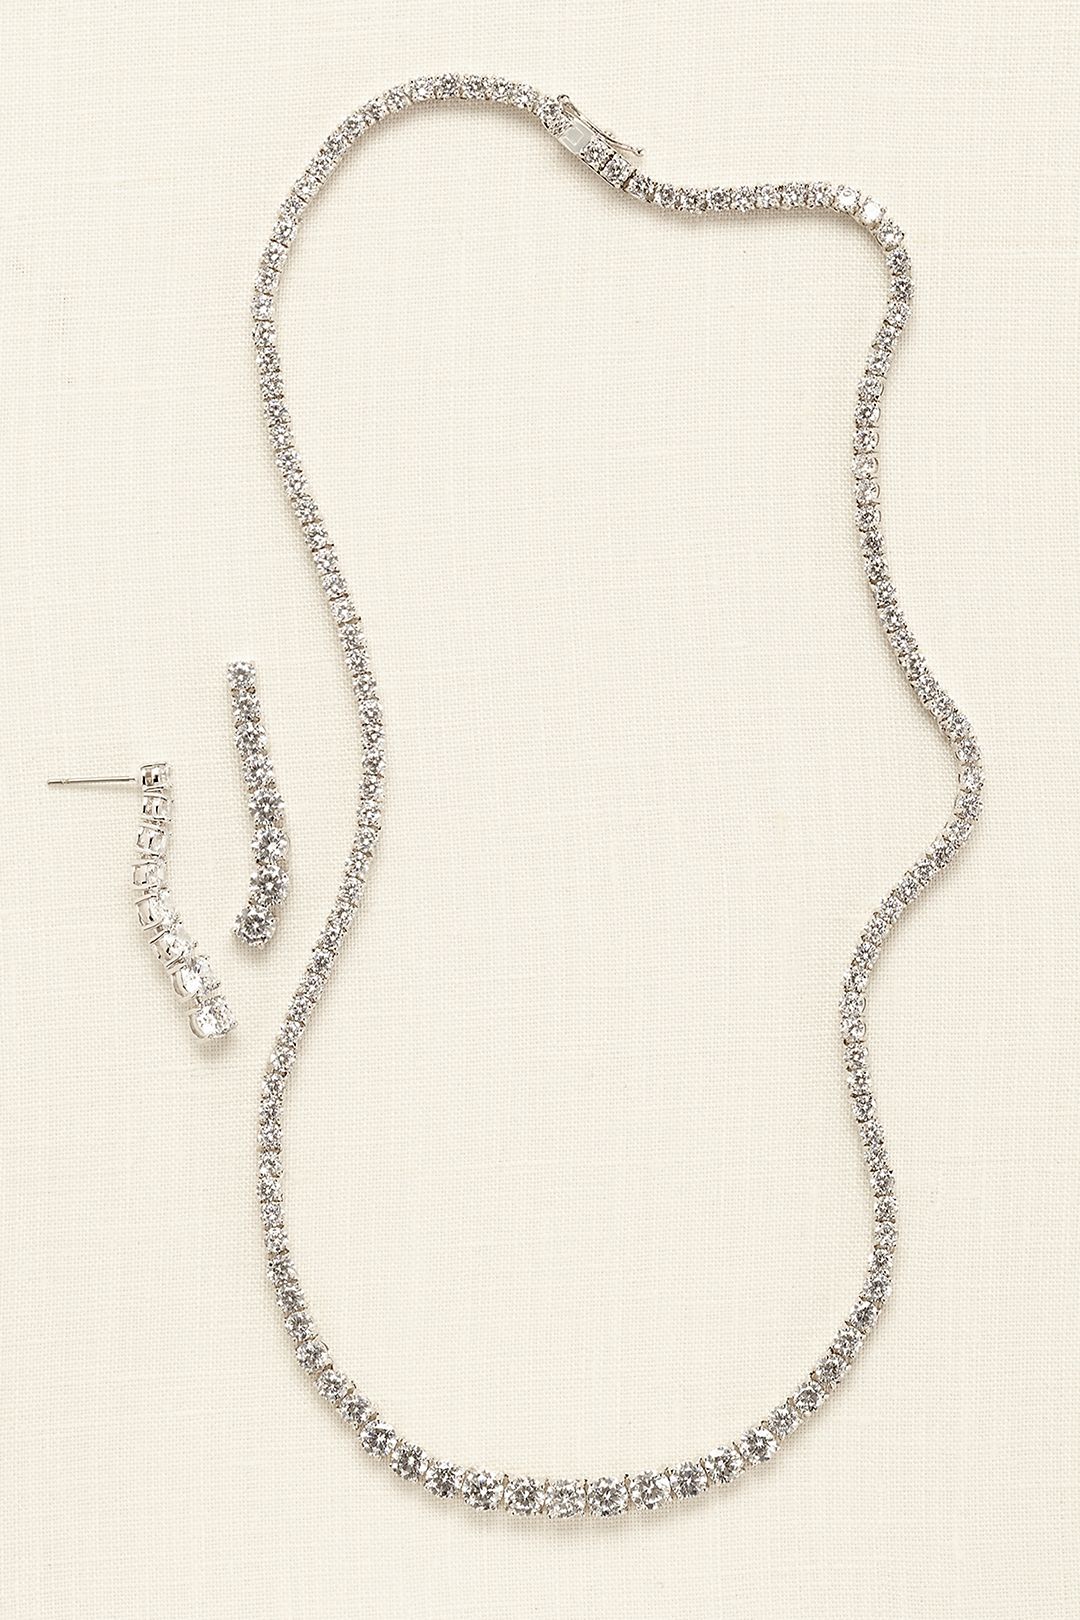 Graduated Cubic Zirconia Necklace and Earring Set Image 1